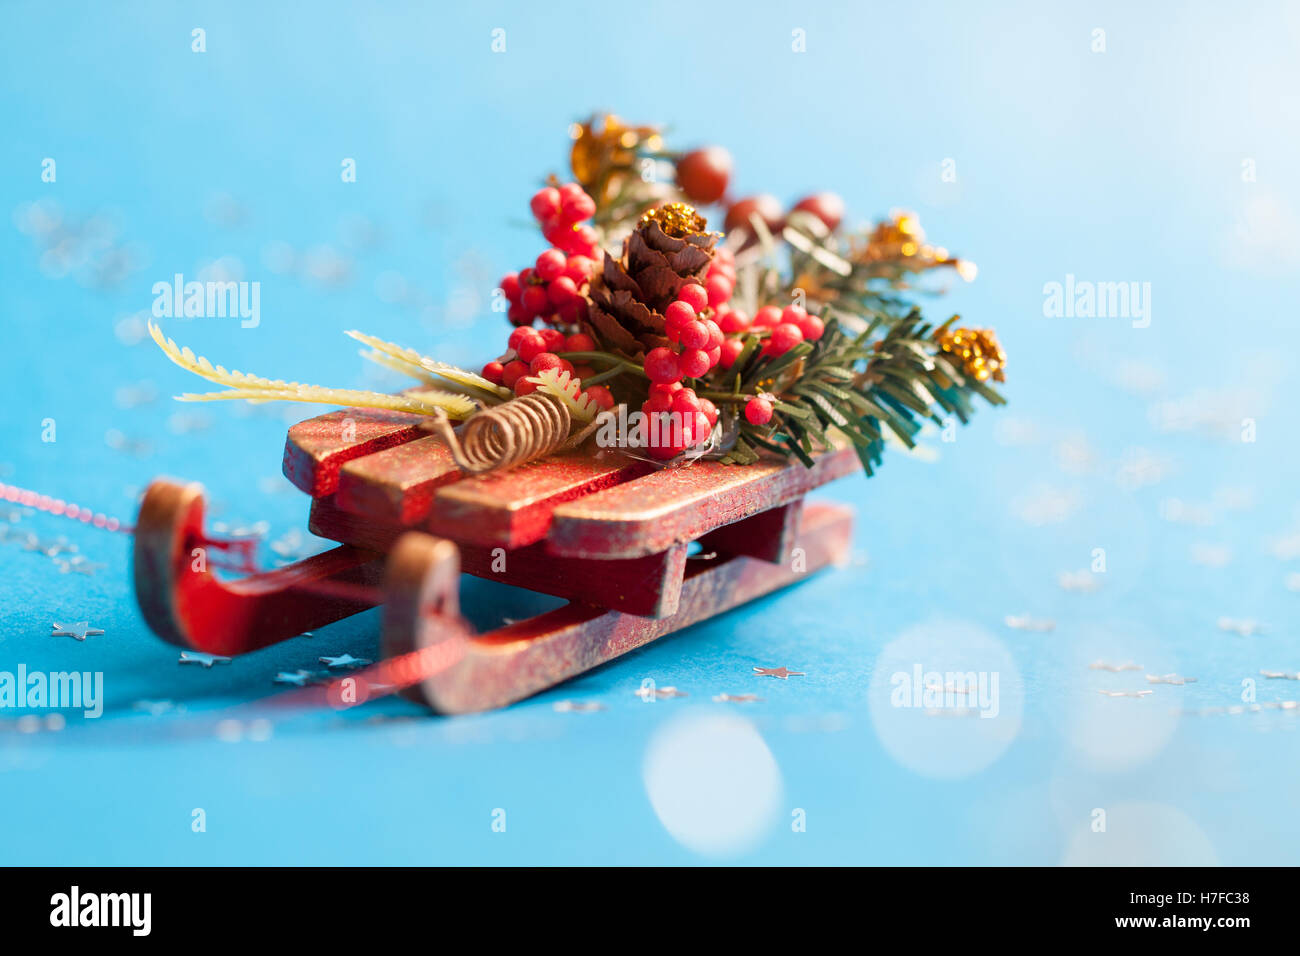 Christmas card with shine silver star and decorative sled standing on blue background in blurred glow balls. Stock Photo